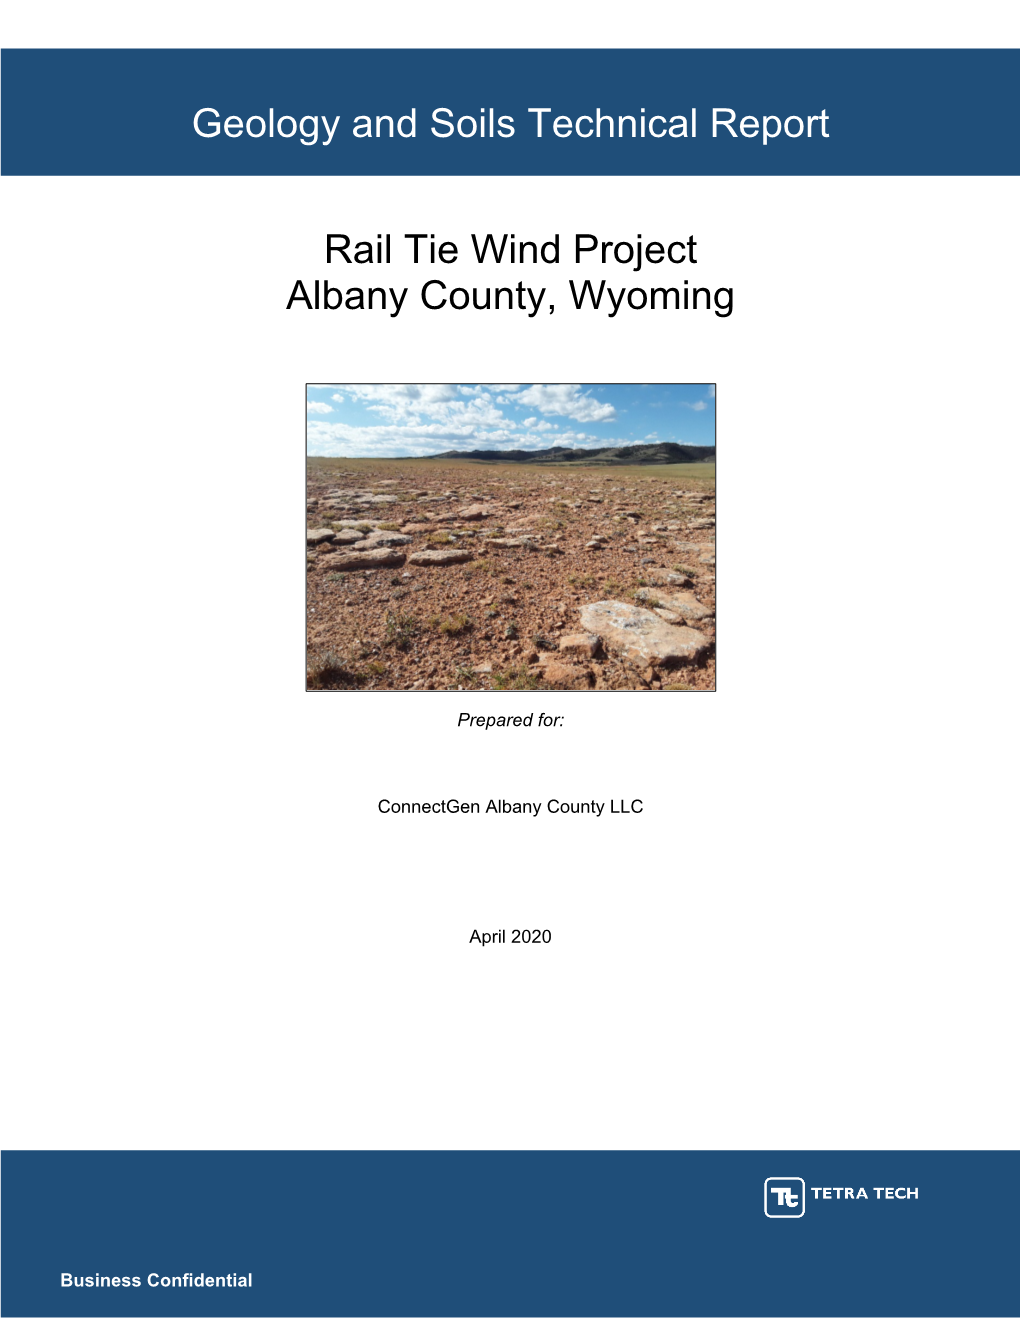 Geology and Soils Technical Report Business Confidential Rail Tie Wind Project Geology and Soils Technical Report